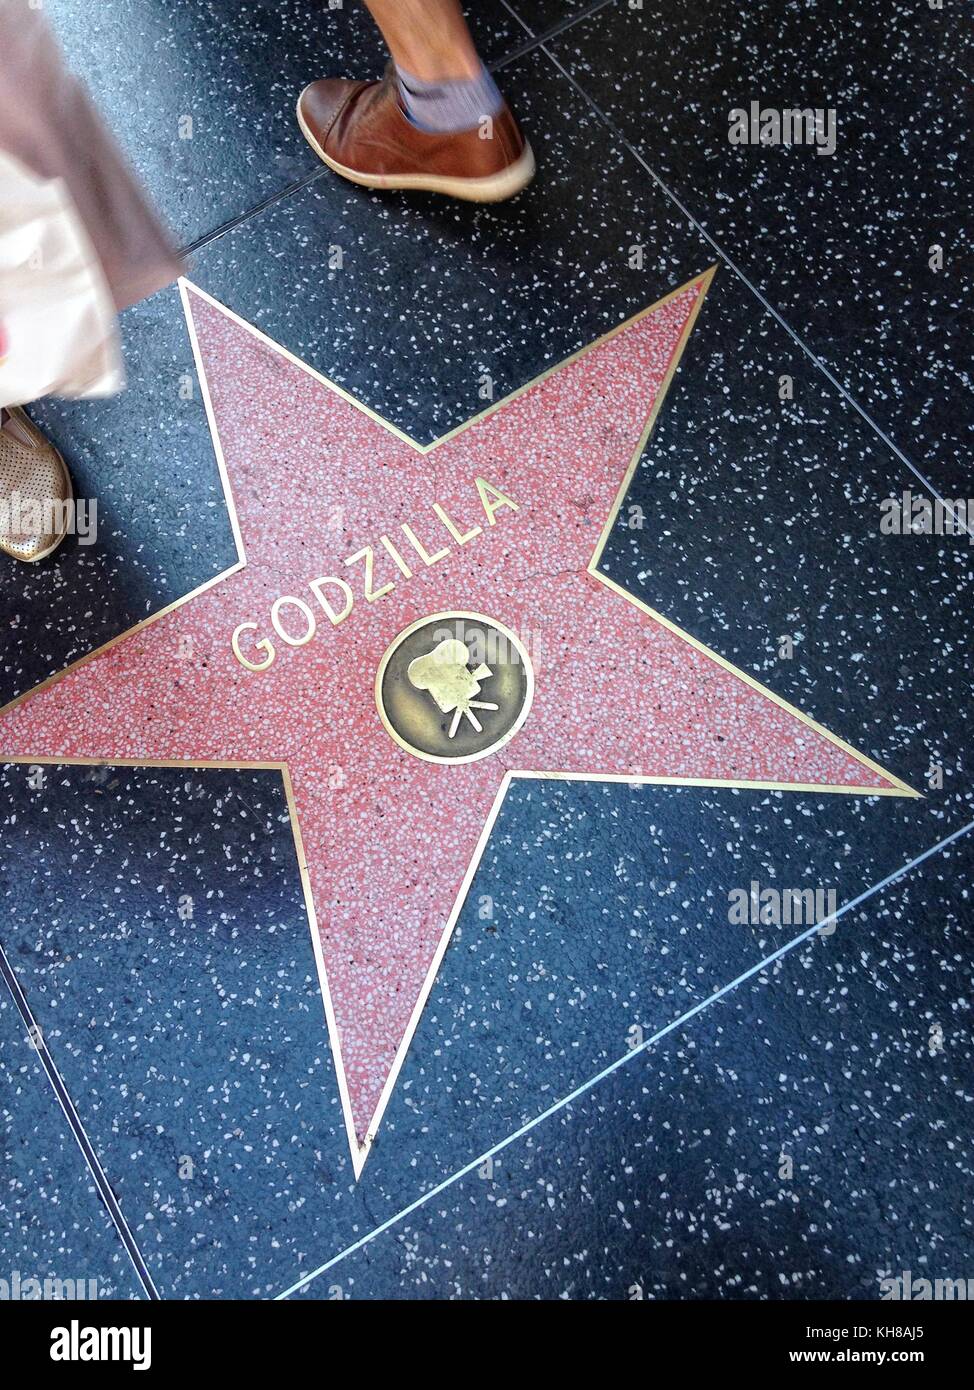 Hollywood, California - July 26 2017: Godzilla Hollywood walk of fame star on July 26, 2017 in Hollywood, CA. Giant monster originating from a series  Stock Photo